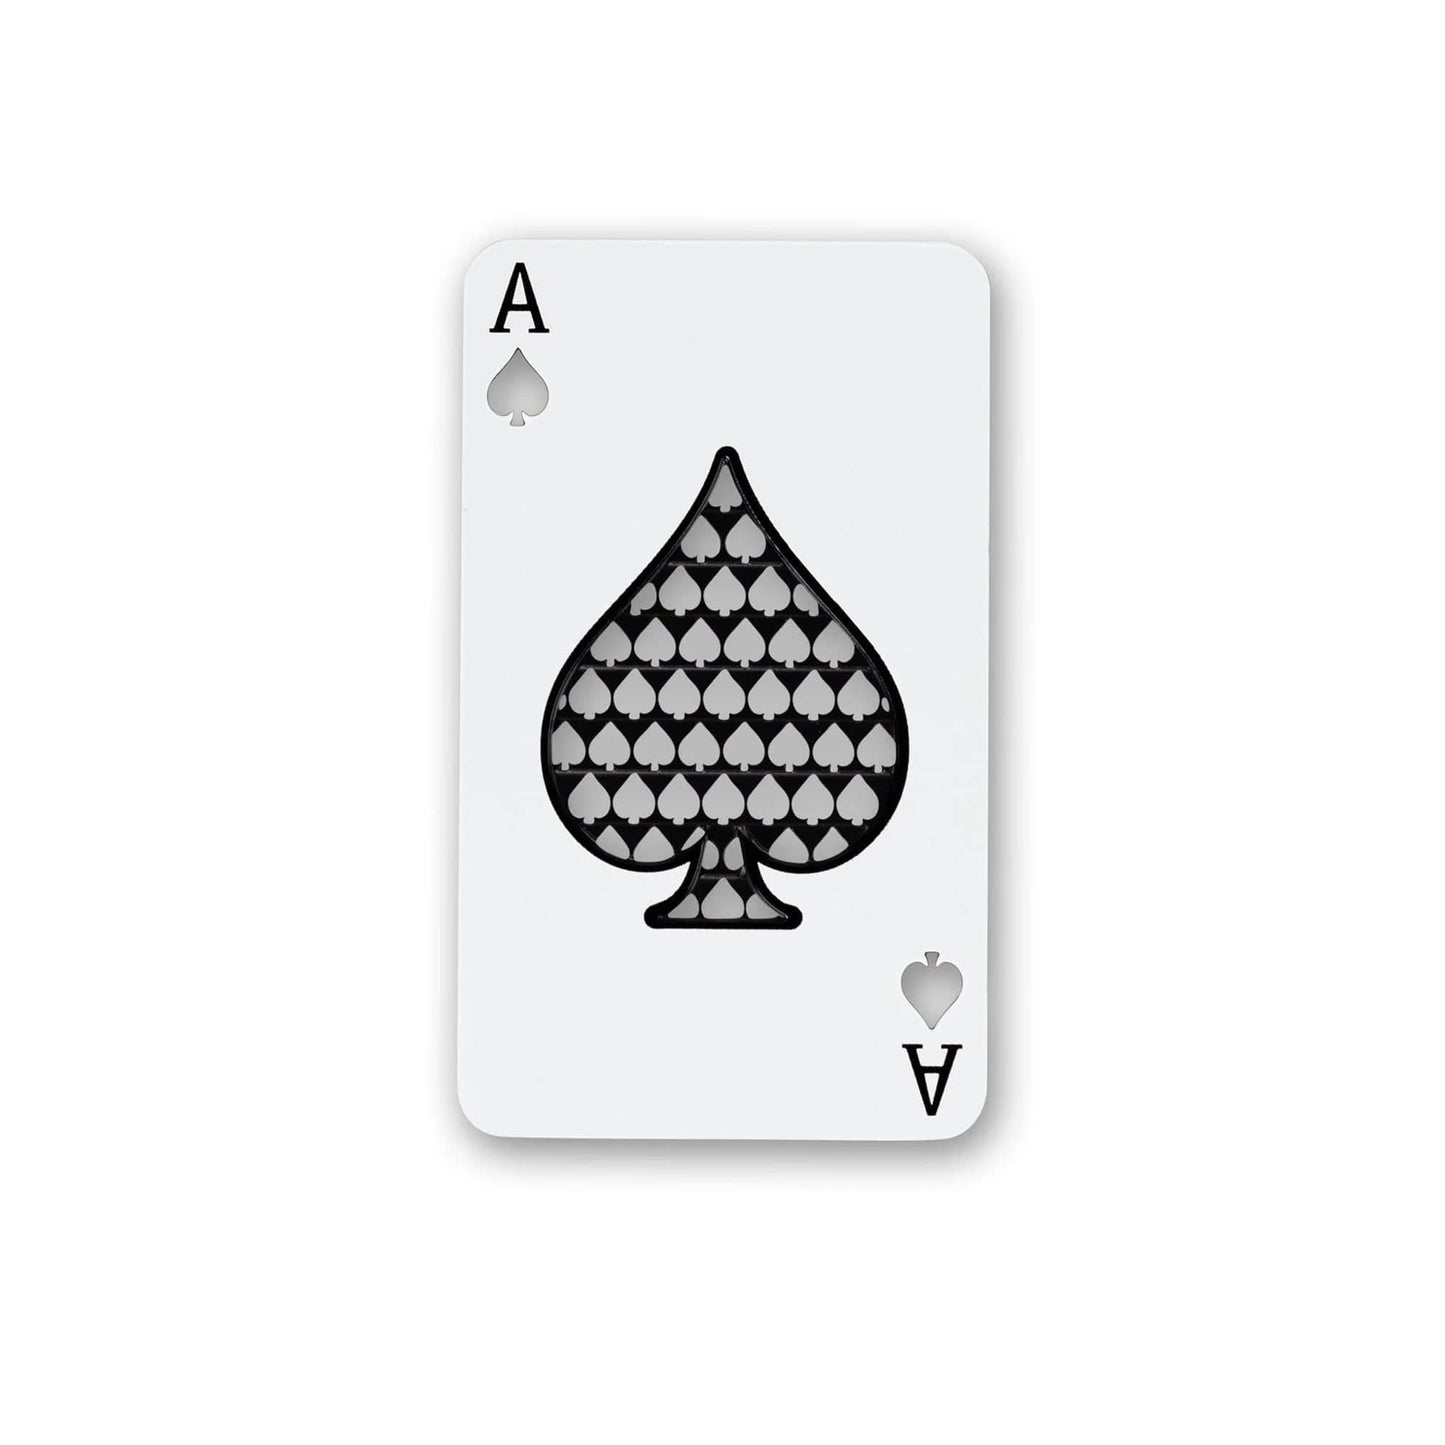 Daily High Club Accessory Ace of Spades V-Syndicate Grinder Card